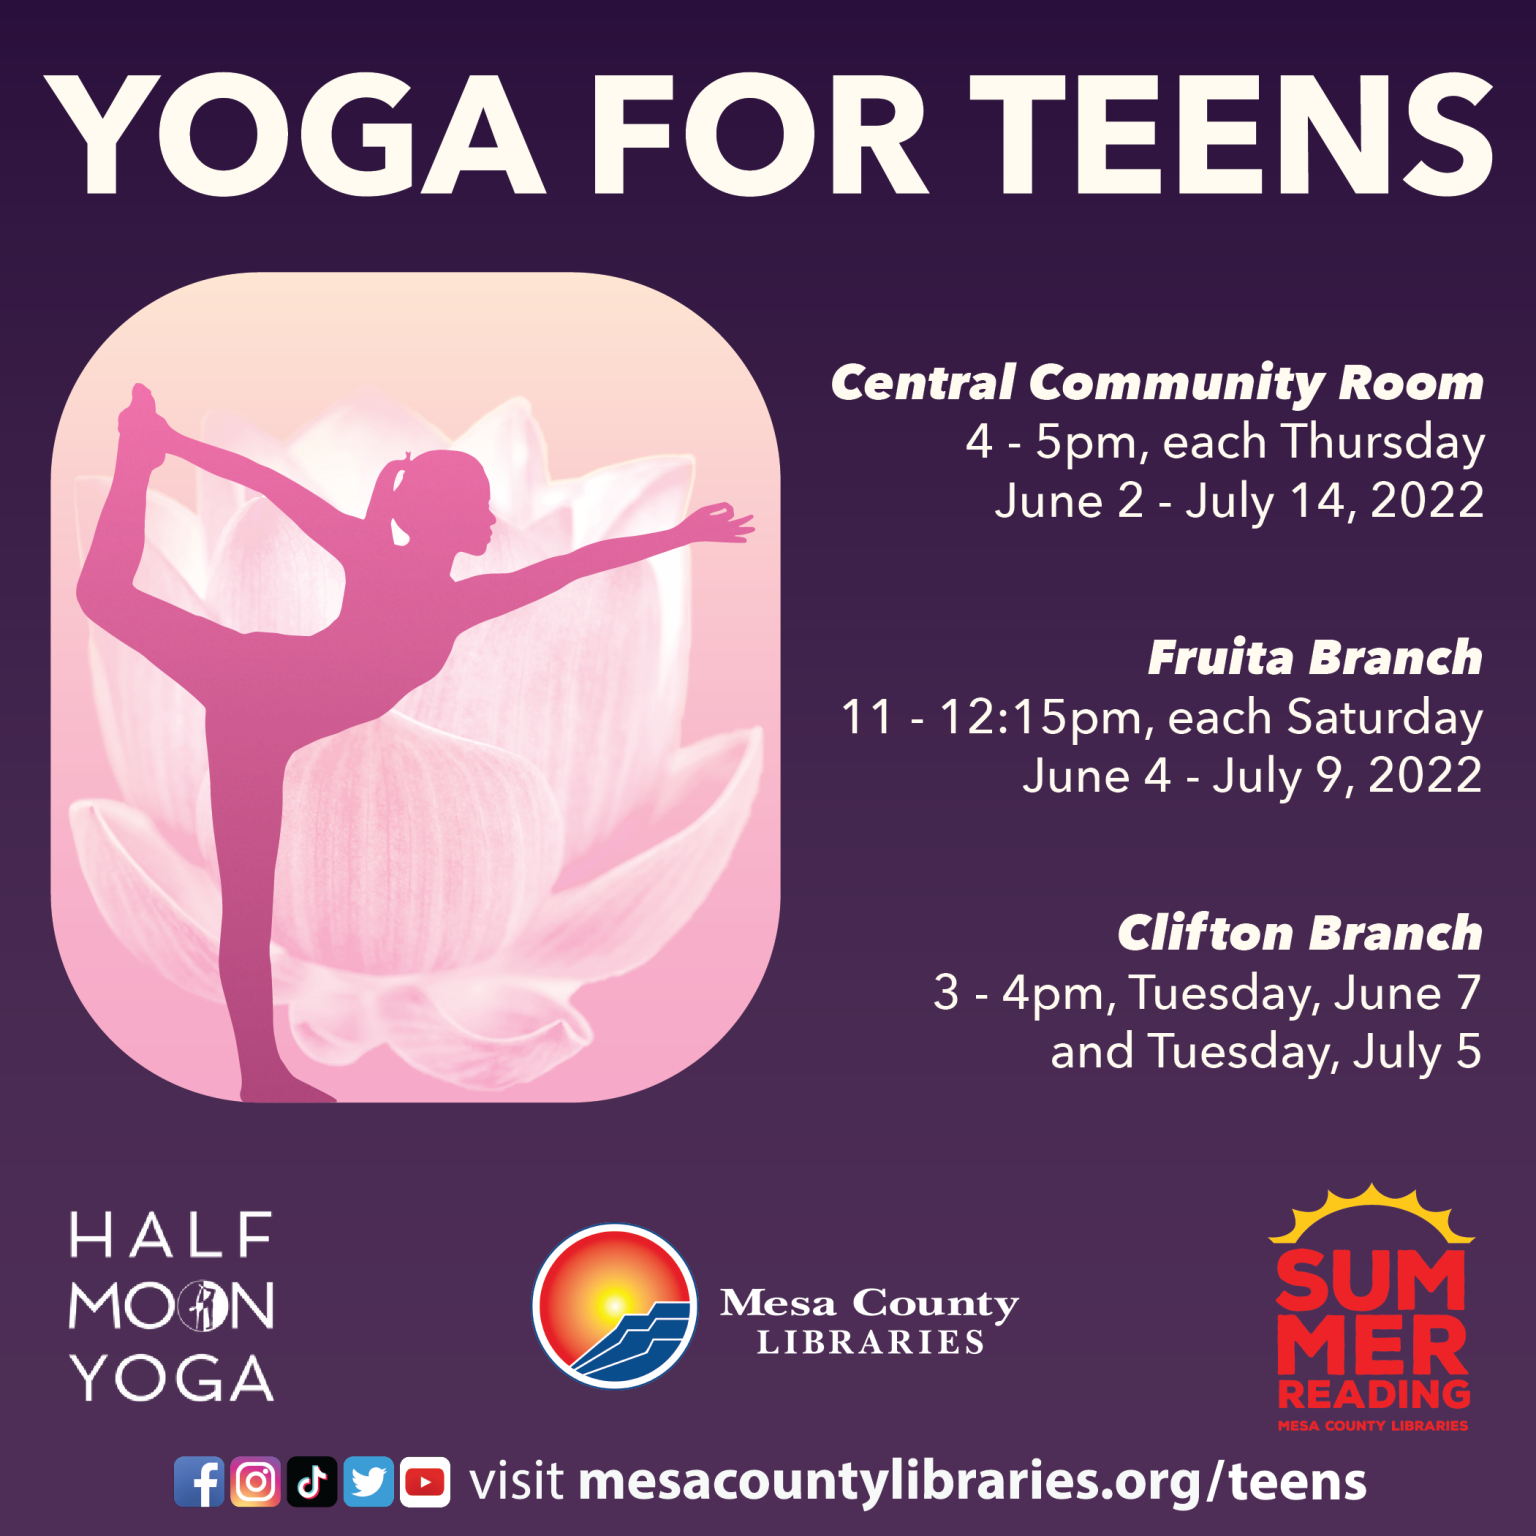 Graphic for the Yoga for Teens program